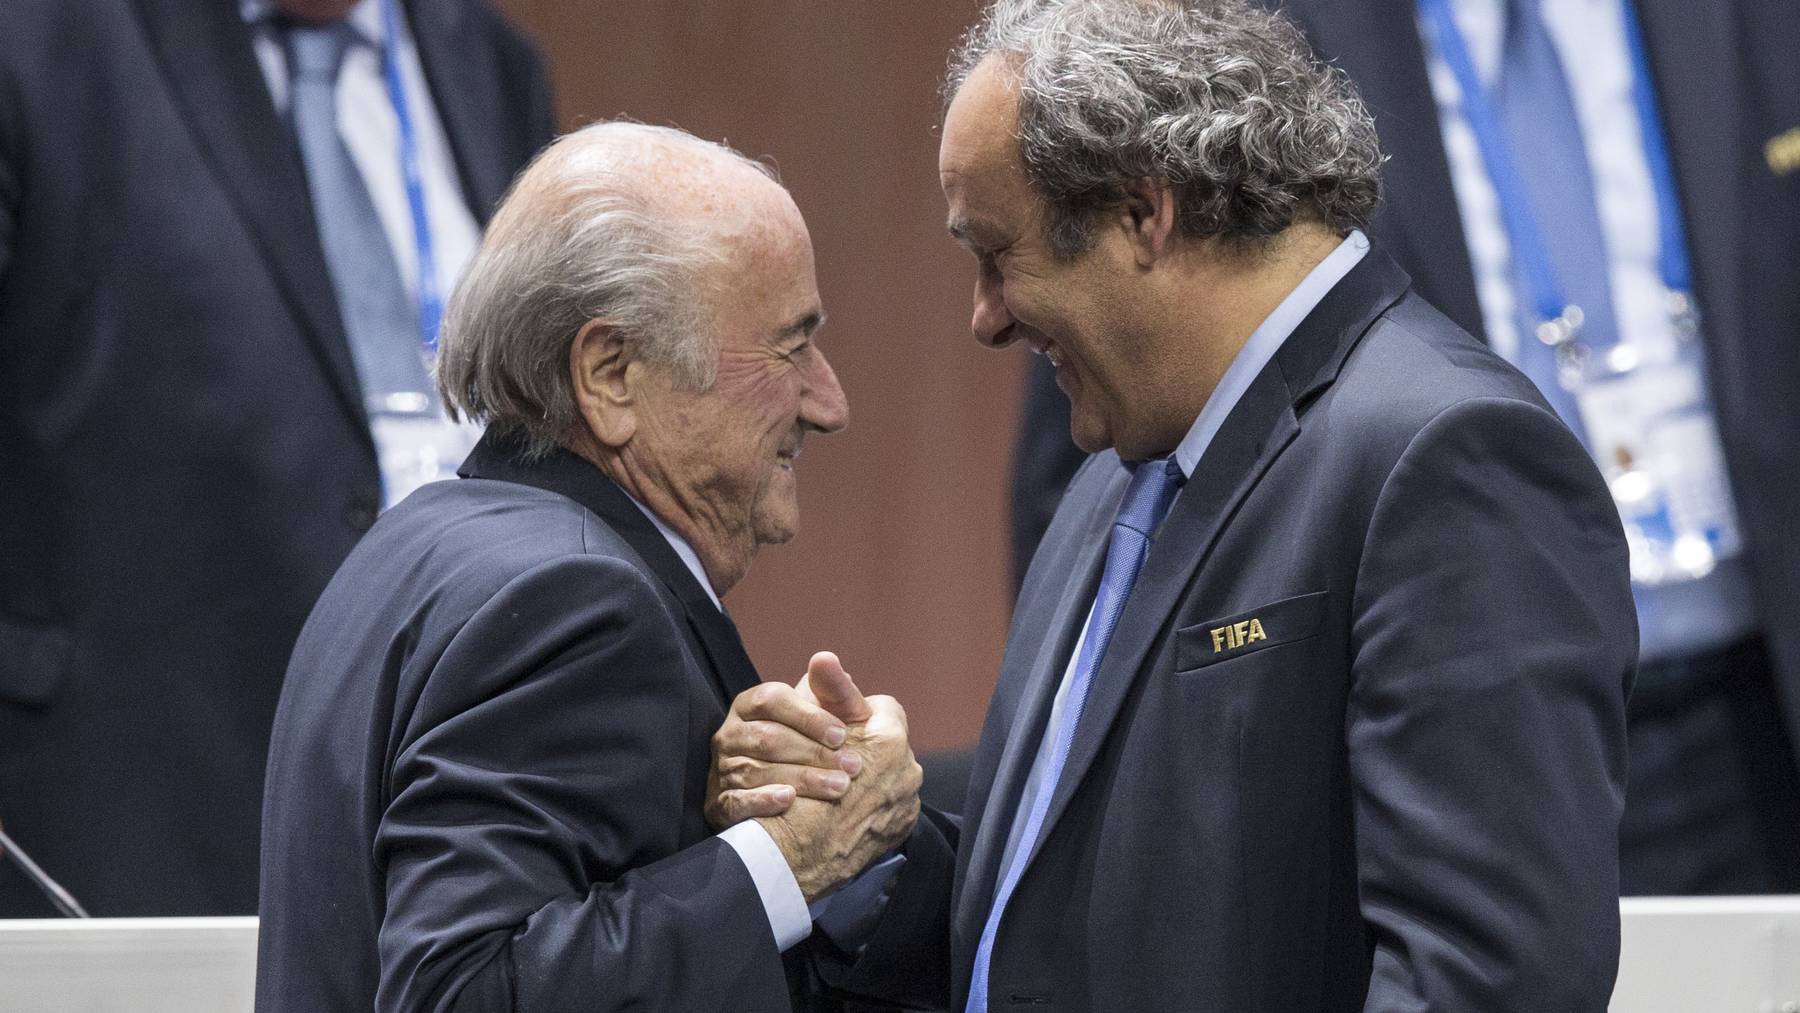 Re-elected FIFA president Joseph Sepp Blatter, left, is congratulated by FIFA vice president and UEFA president Michel Platini after his speech during the 65th FIFA Congress held at the Hallenstadion in Zurich, Switzerland, Friday, May 29, 2015. Blatter has been re-elected as FIFA president for a fifth term, chosen to lead world soccer despite separate U.S. and Swiss criminal investigations into corruption. The 209 FIFA member federations gave the 79-year-old Blatter another four-year term on Friday after Prince Ali bin al-Hussein of Jordan conceded defeat after losing 133-73 in the first round. (KEYSTONE/Patrick B. Kraemer)